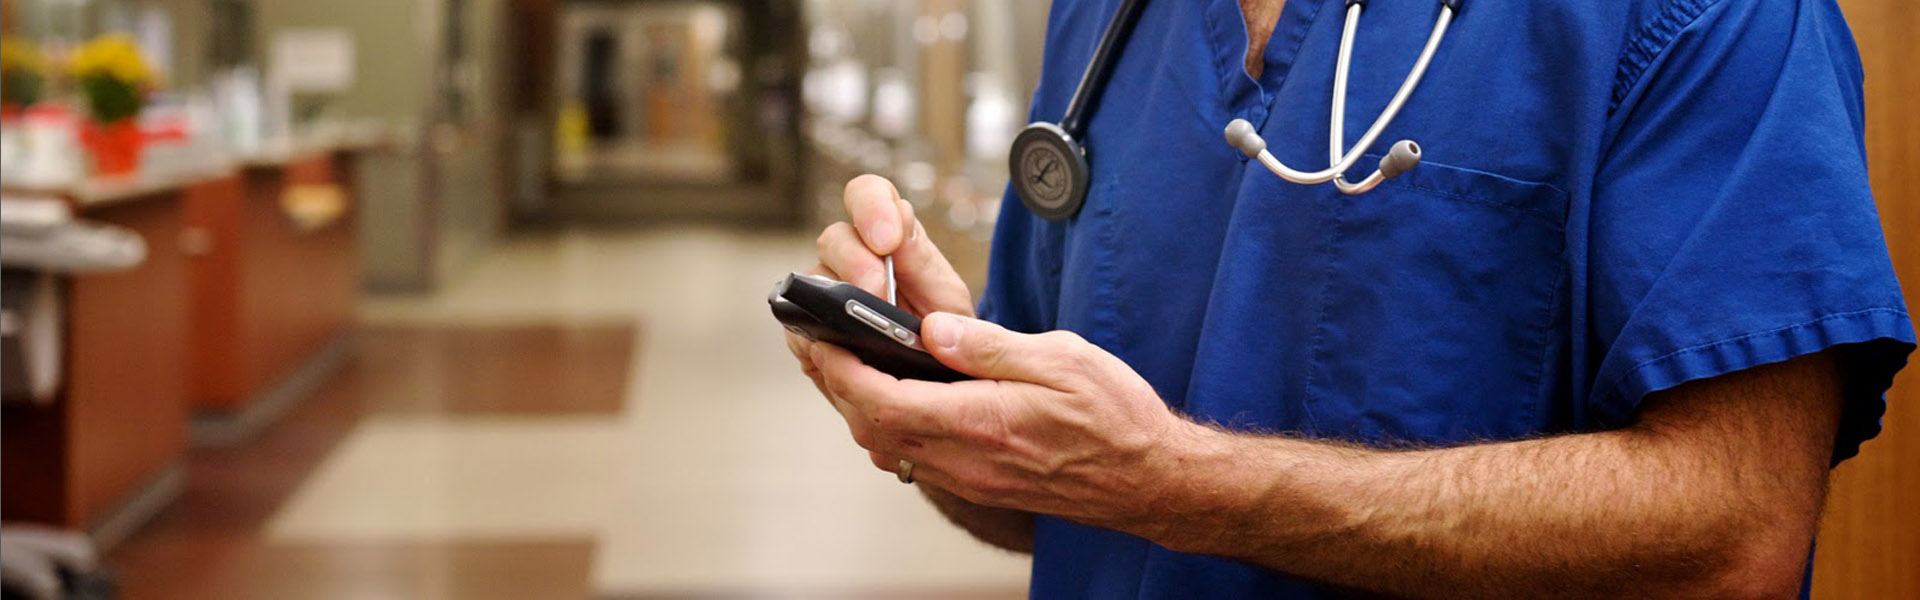 Male nurse is standing in hospital wing and using a mobile device for secure clinical messaging